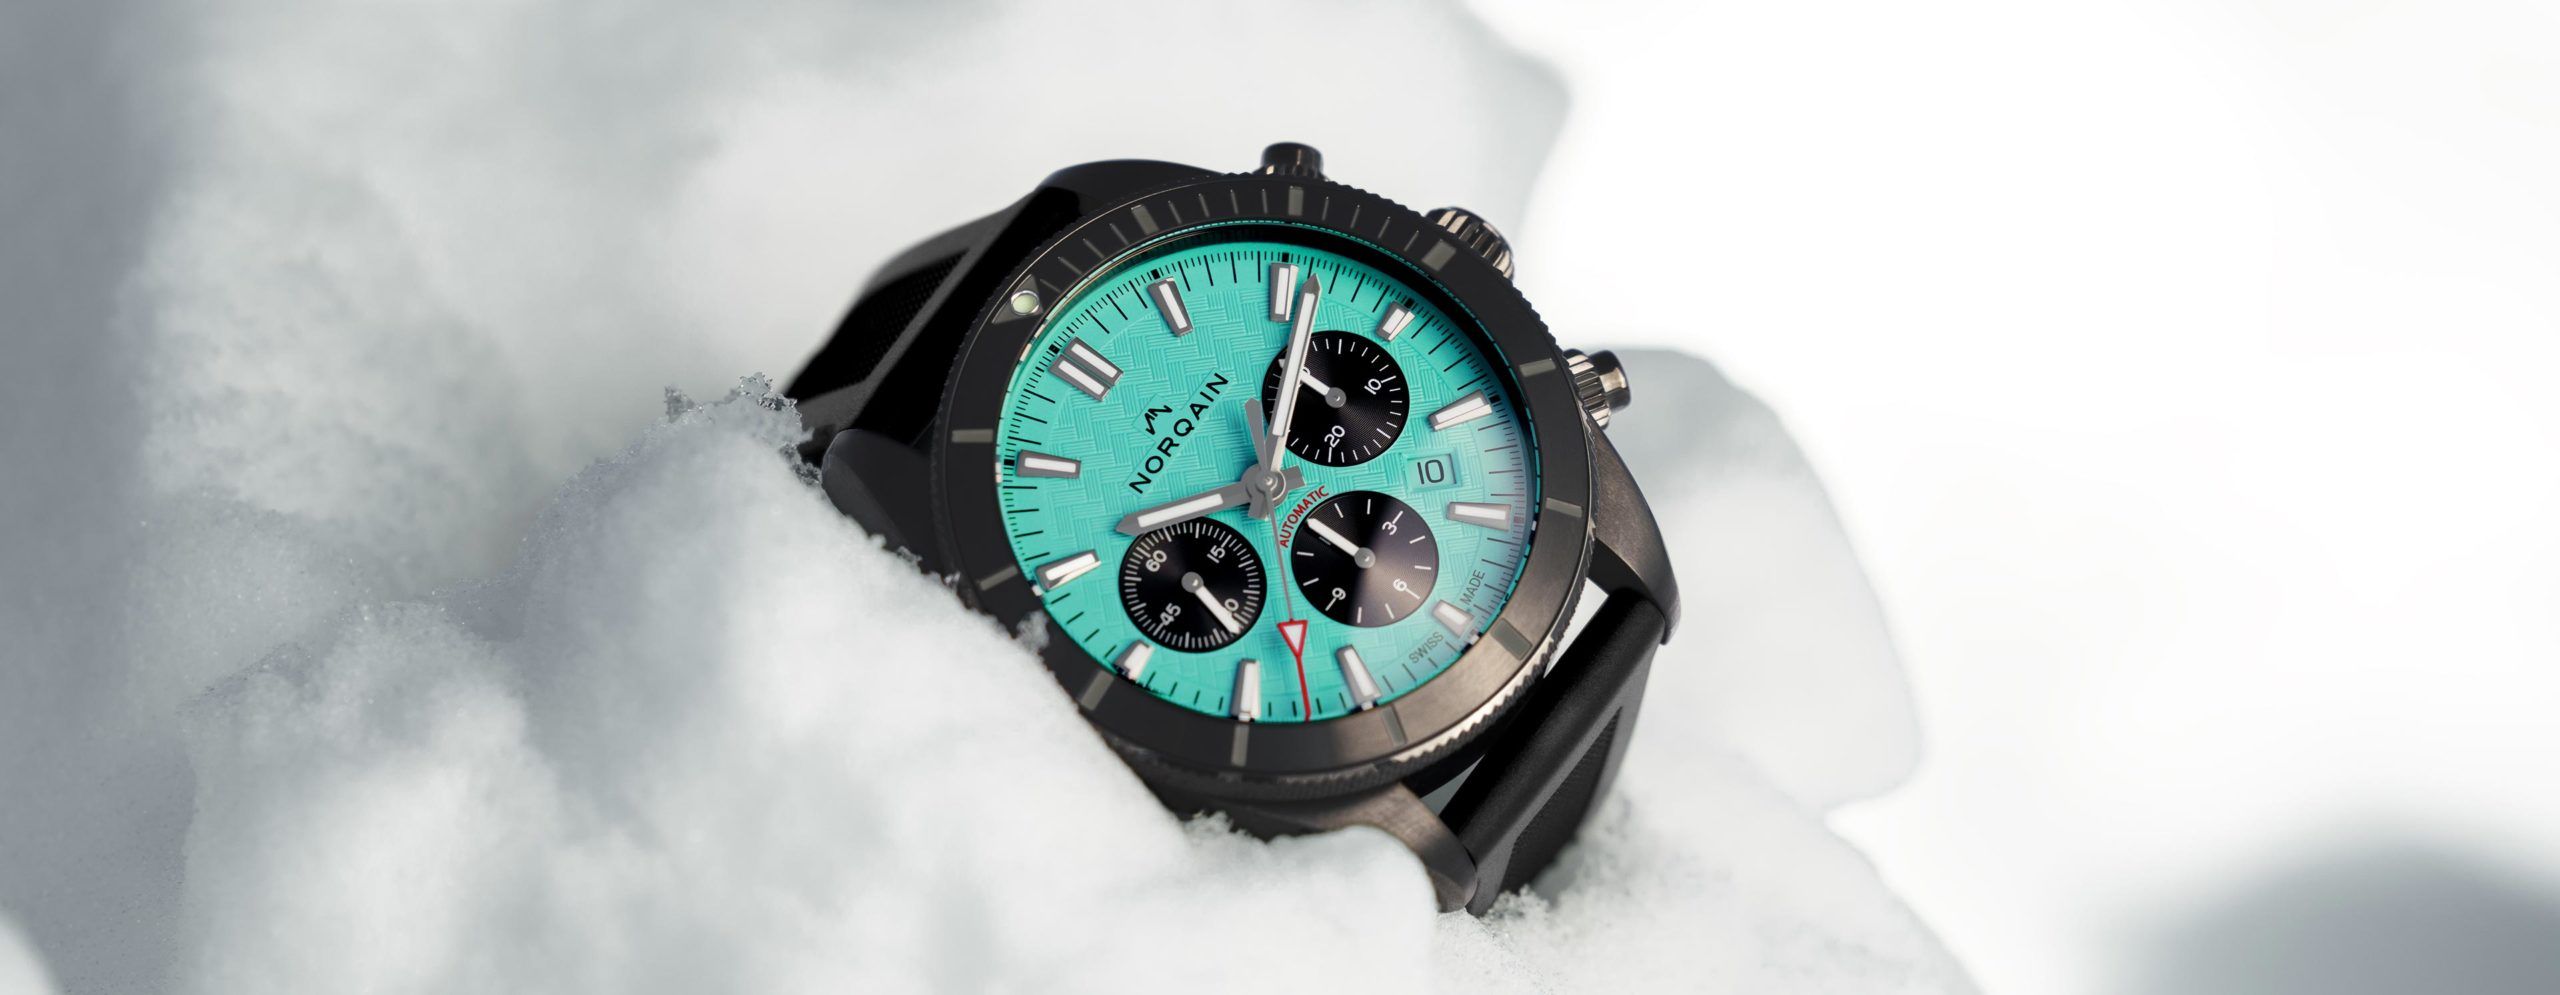 Norqain’s Latest Adventure Sport Chronos: Their Newest All-Rounder Sport Watches